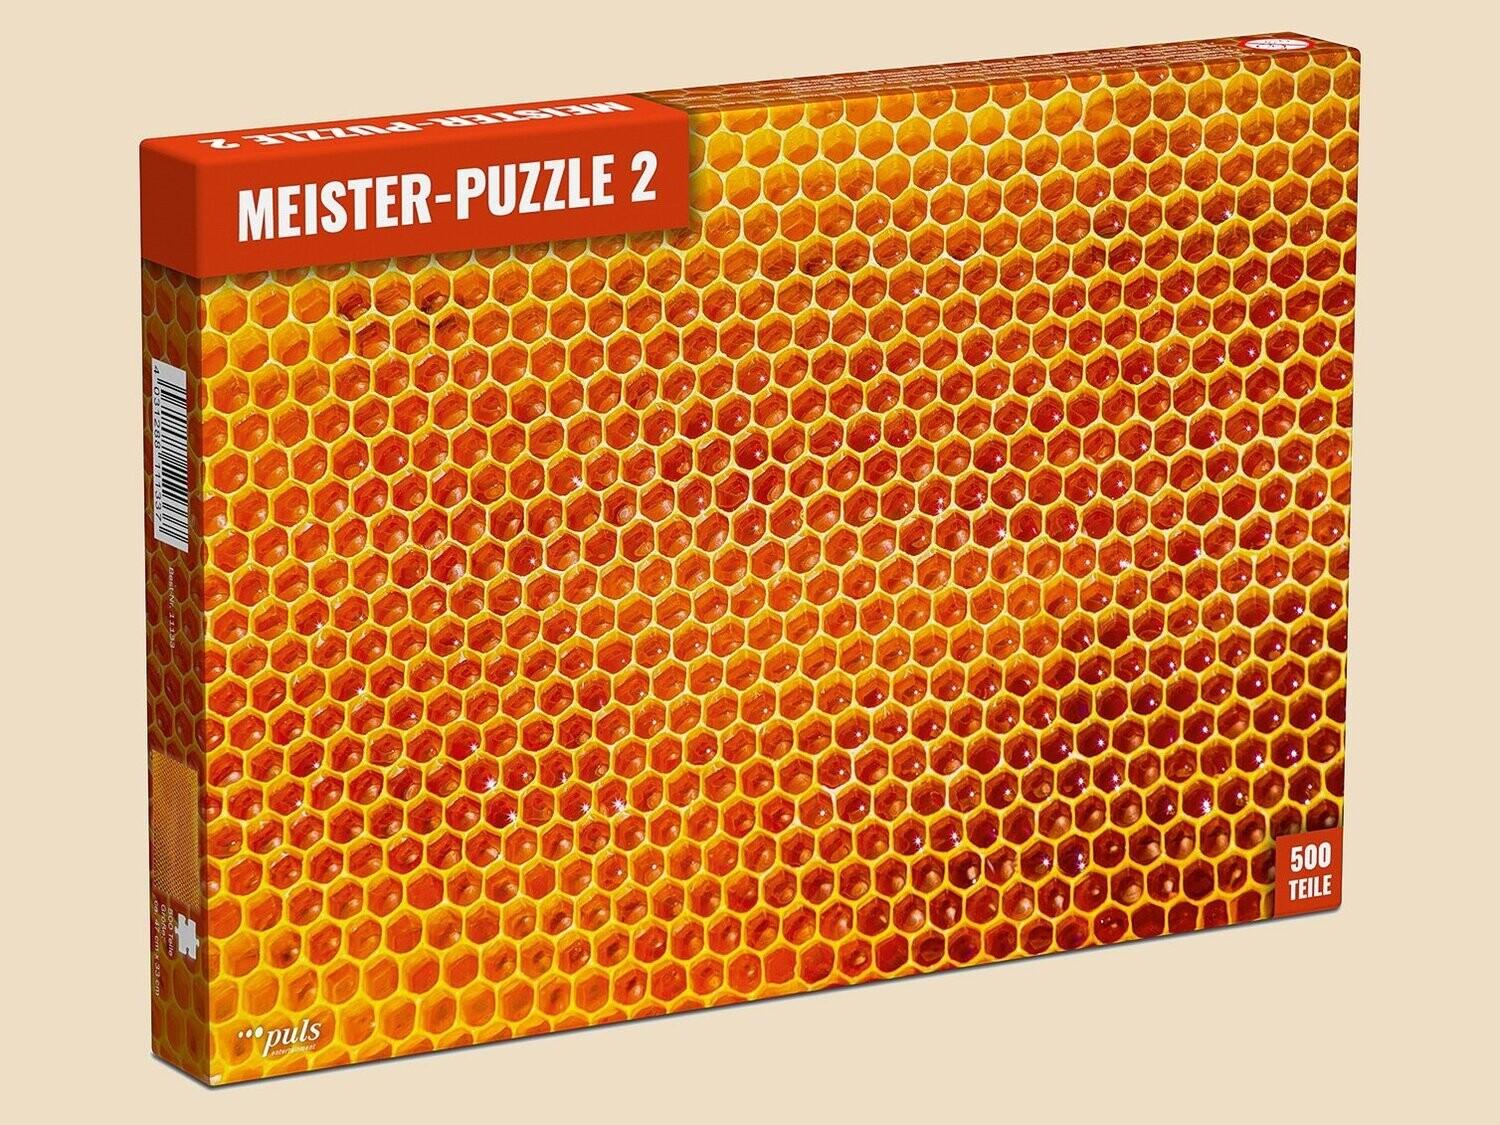 Meister-Puzzle 2